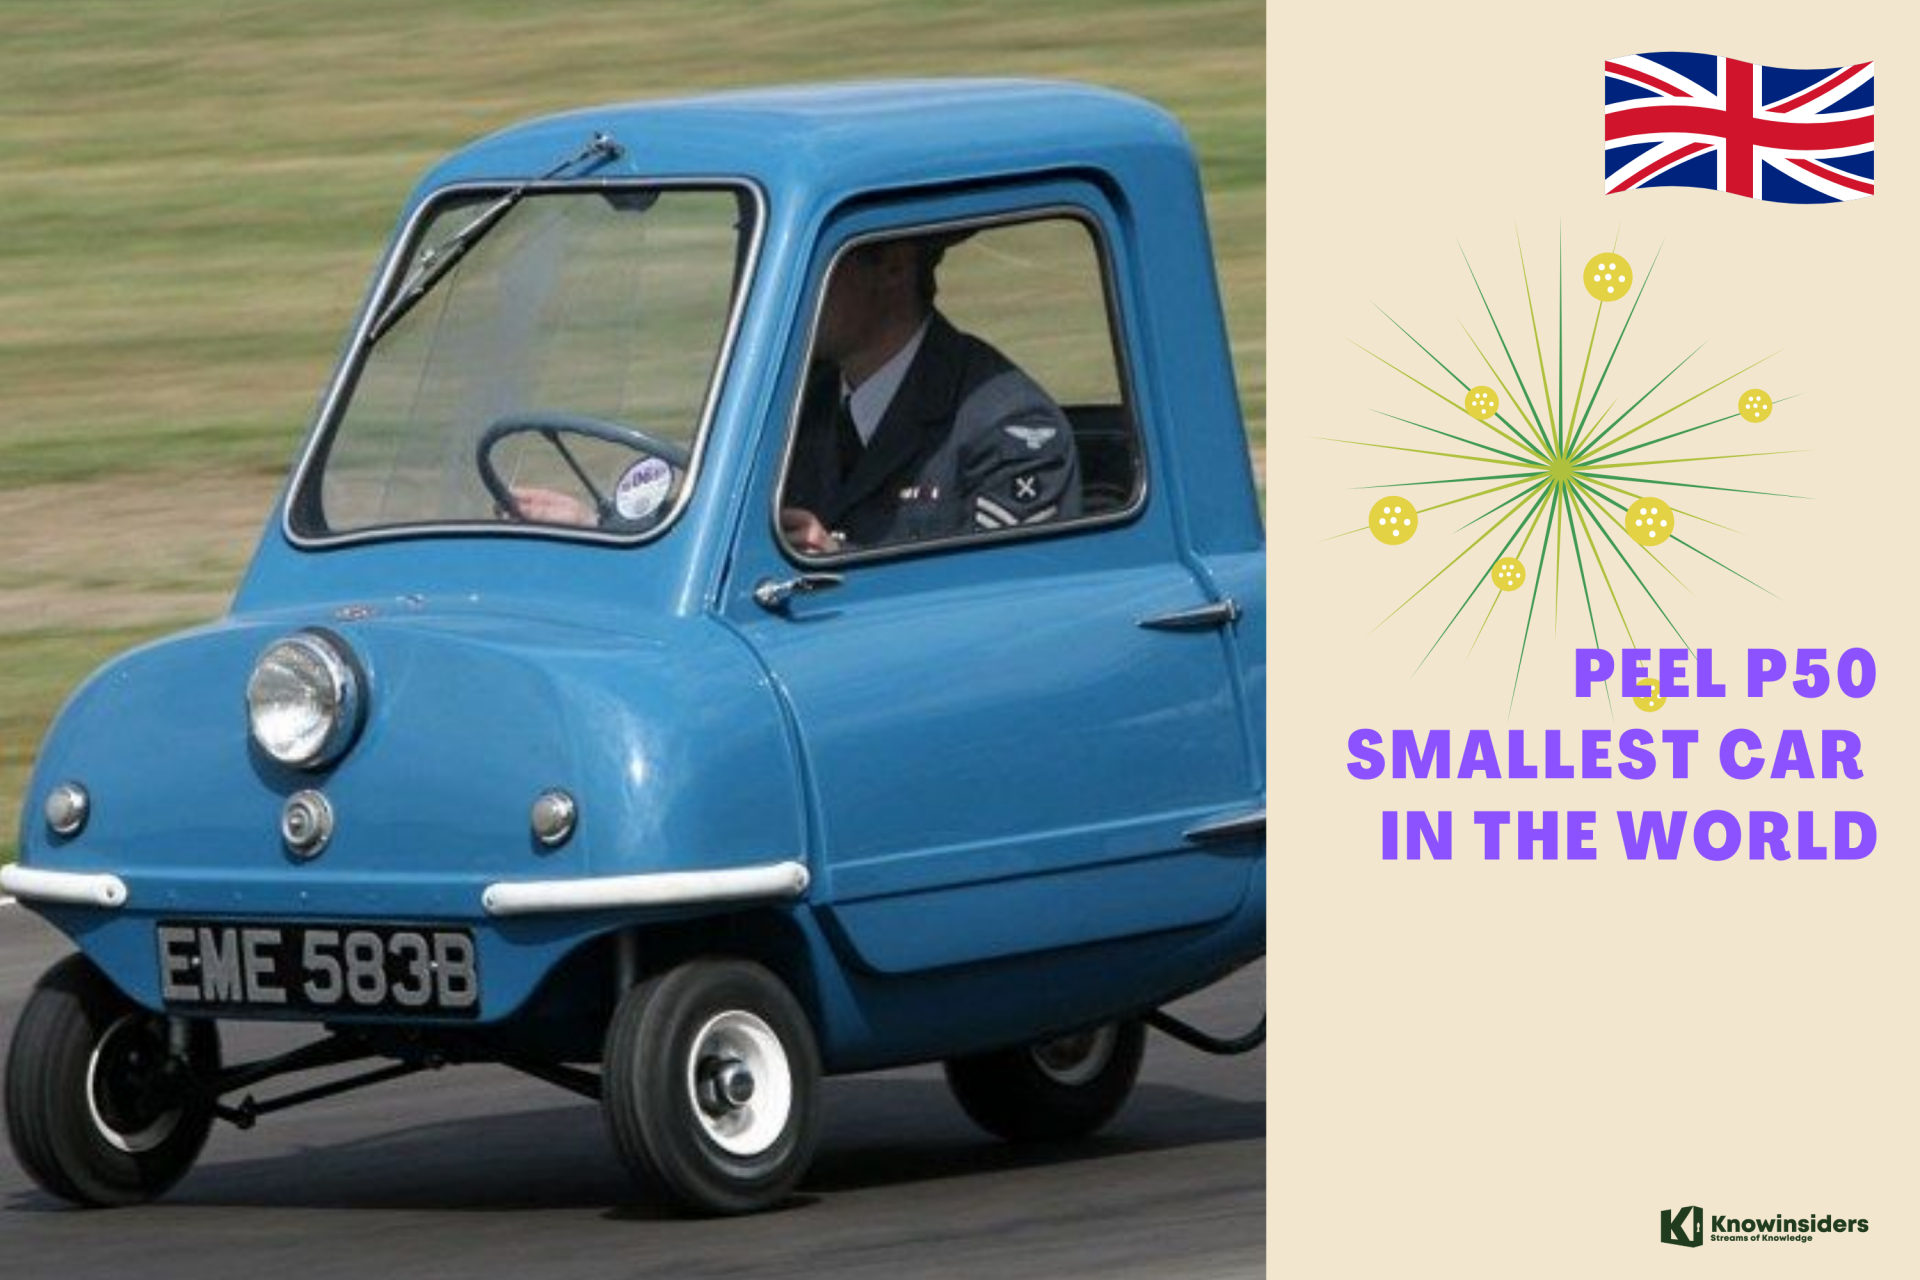 What Is The Smallest Car In The World: Peel P50